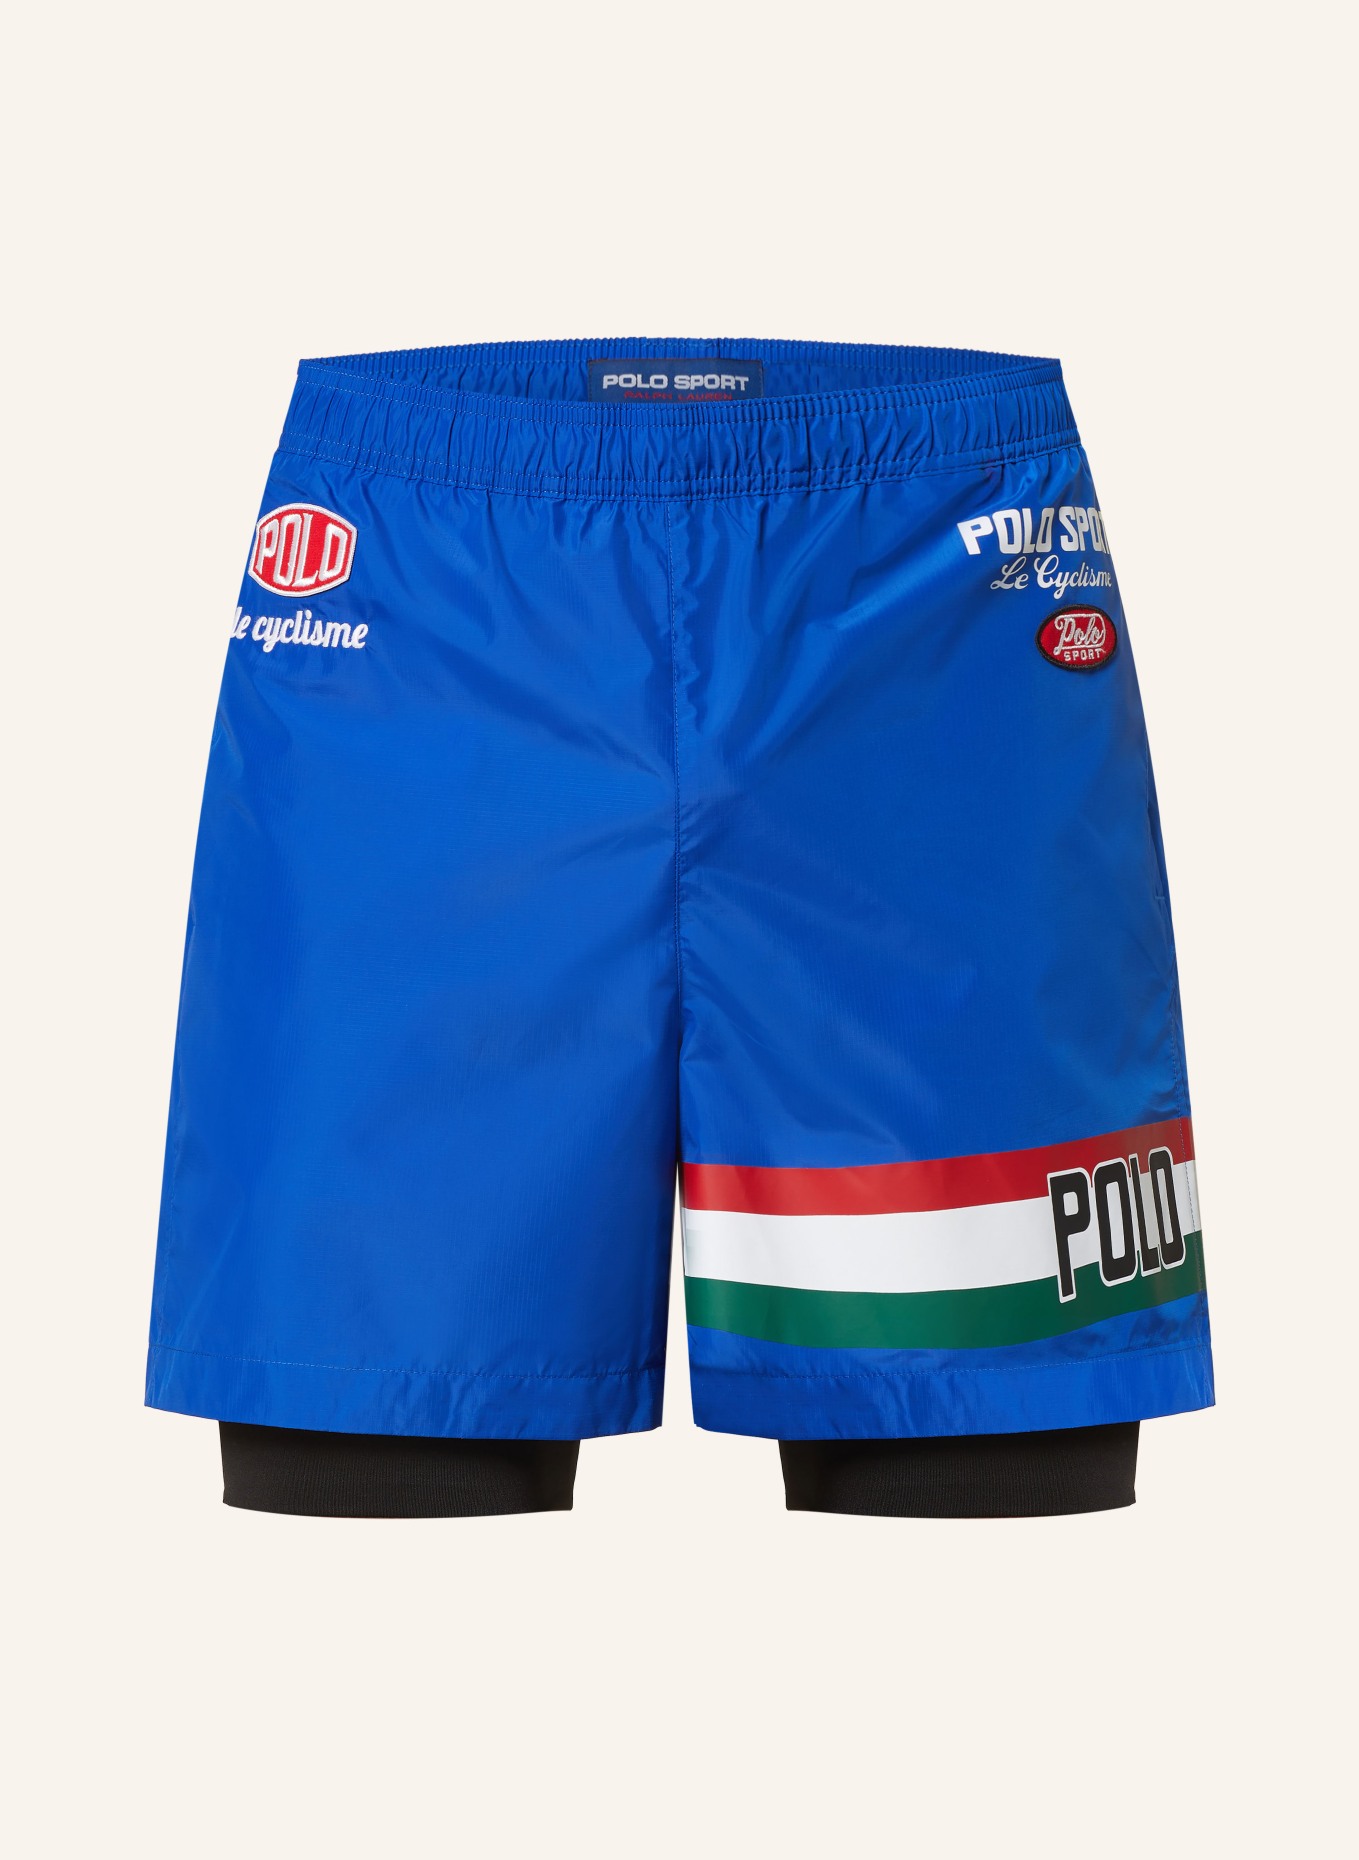 POLO SPORT 2-in-1 shorts, Color: BLUE/ WHITE/ RED (Image 1)